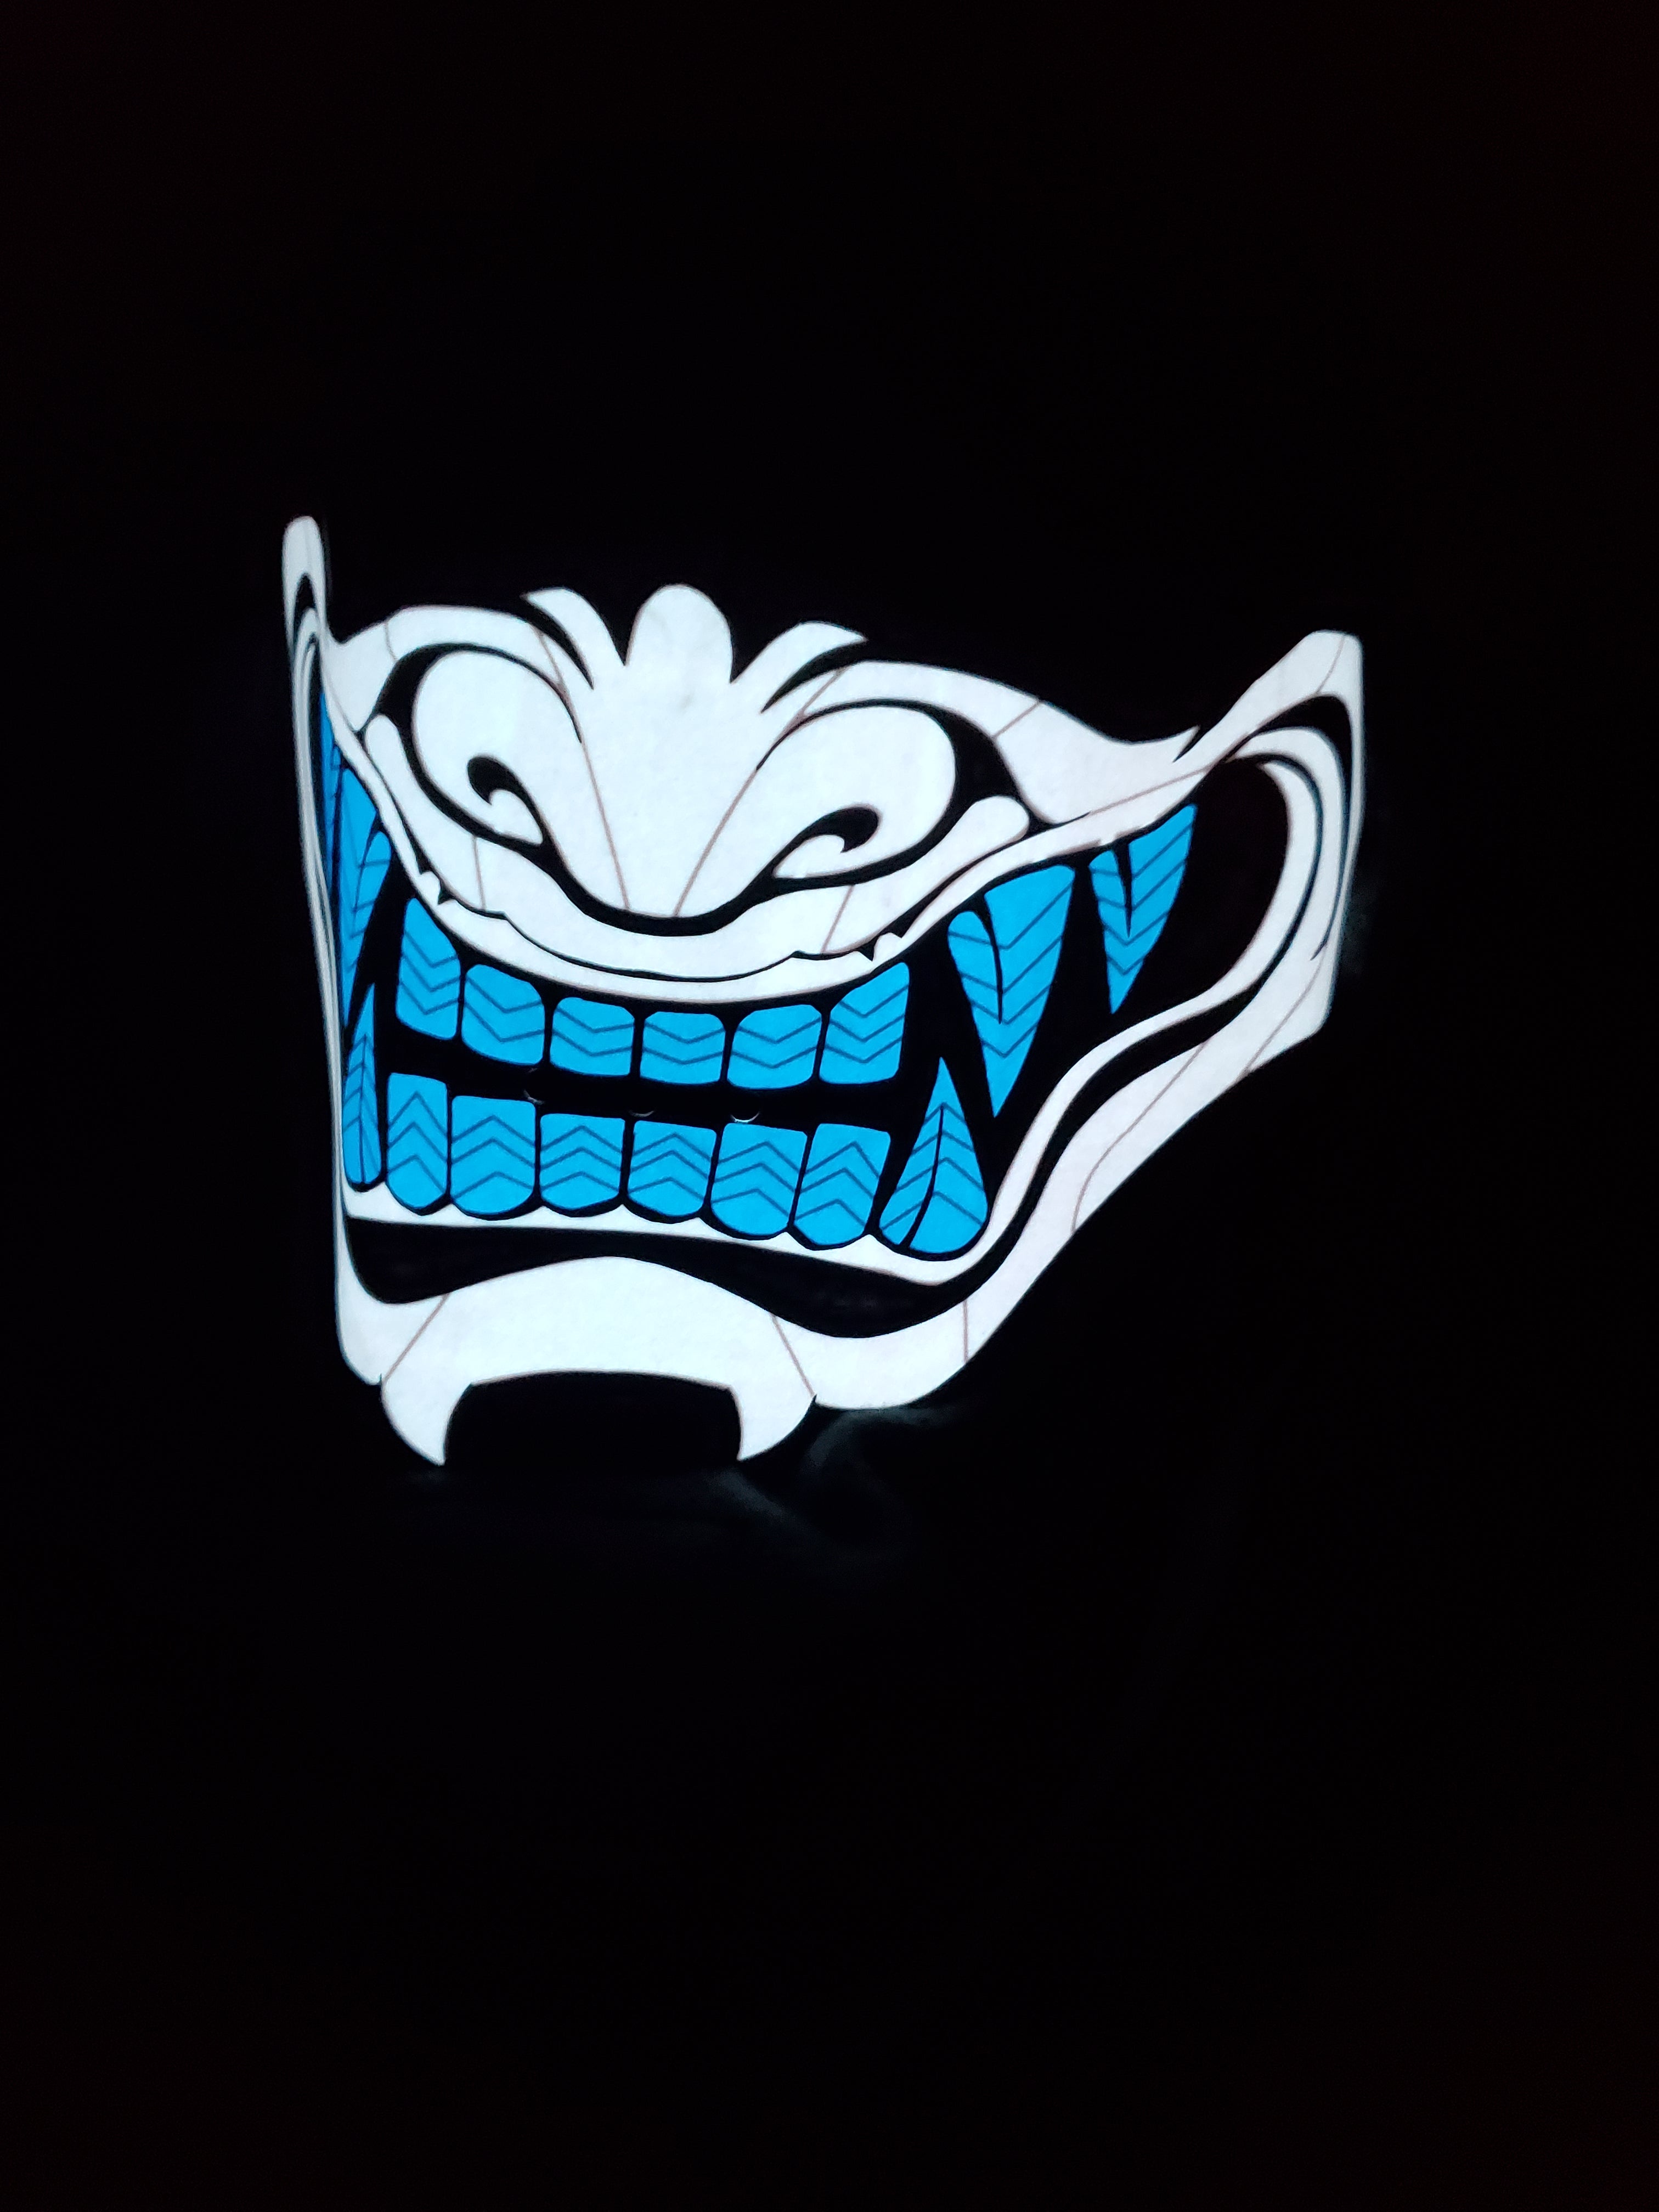 Sound activated white with blue oni mask